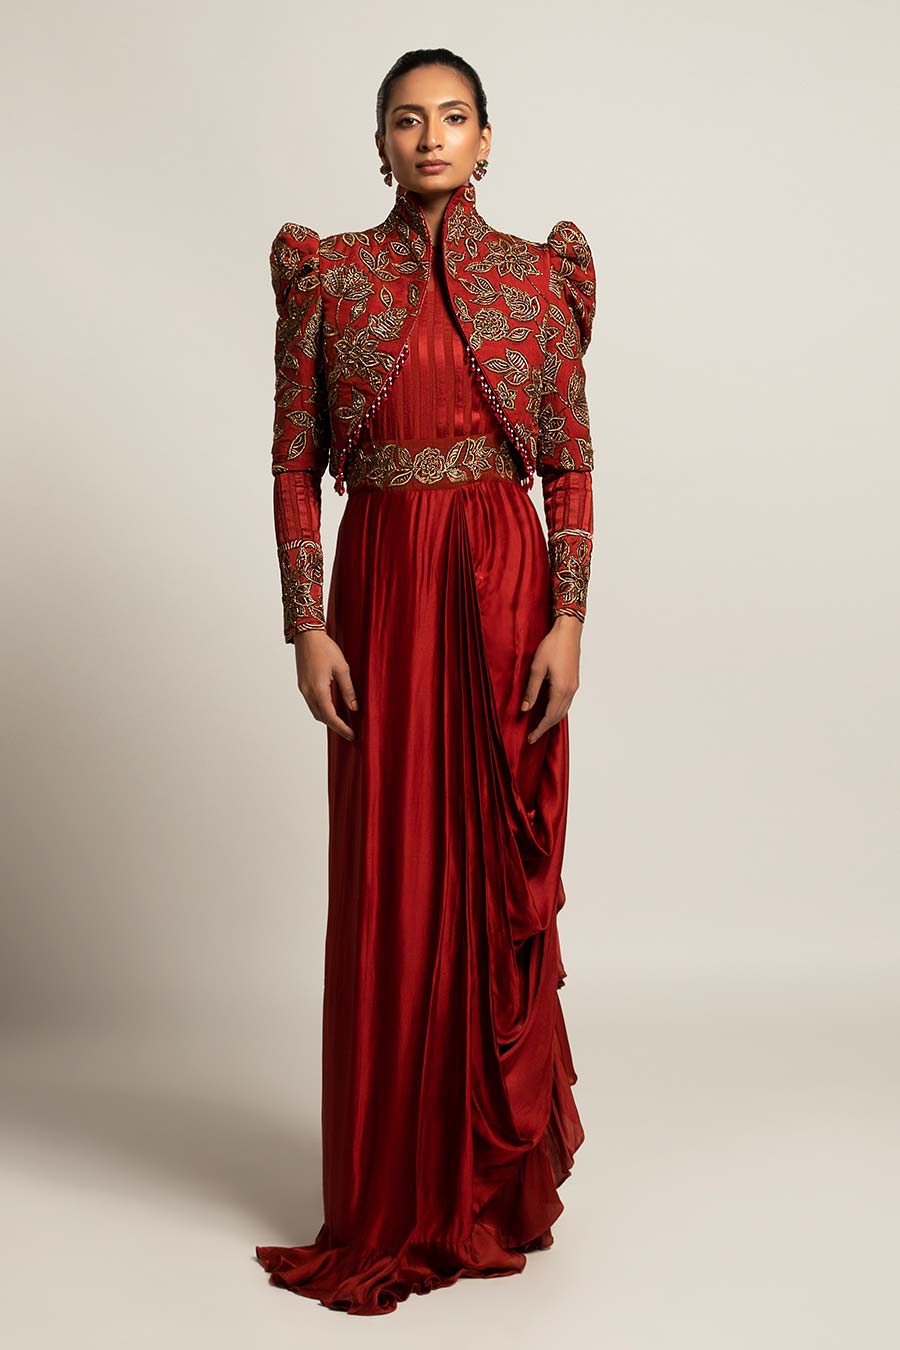 Shop Exclusive Designer Dresses for Women Online - House of Designers –  Tagged 